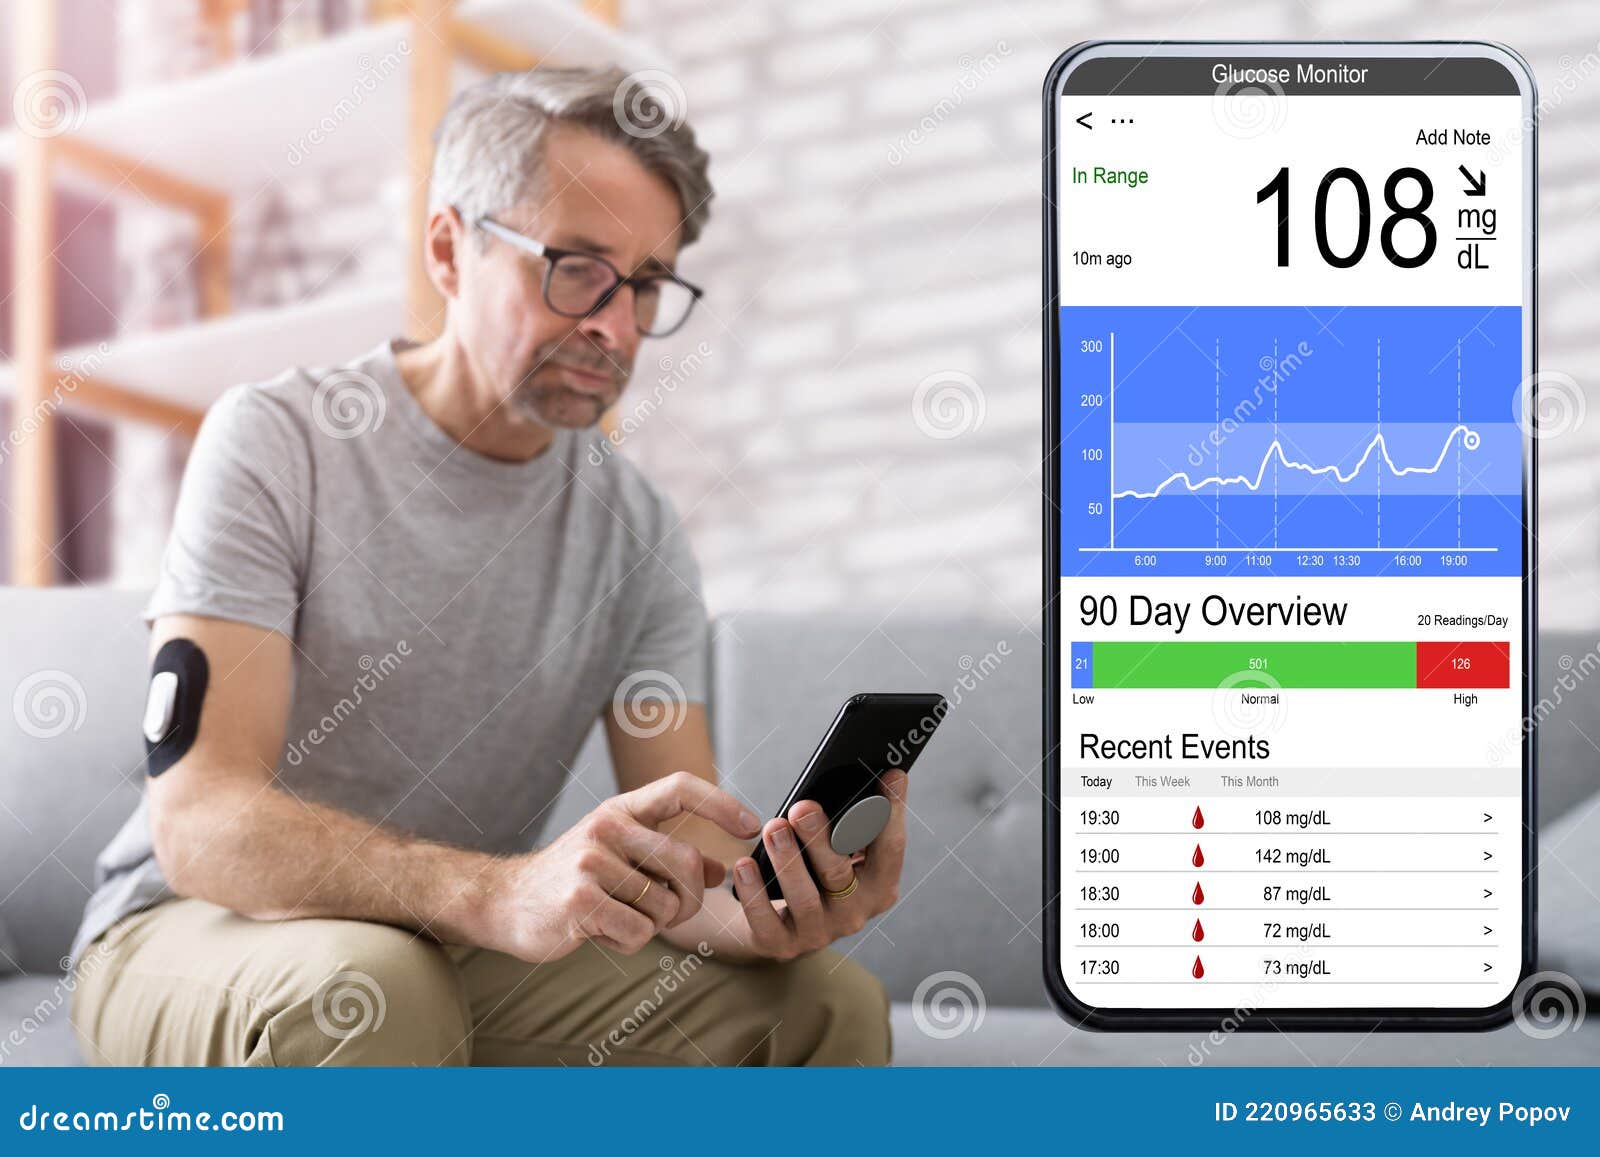 continuous glucose monitor blood sugar test phone app